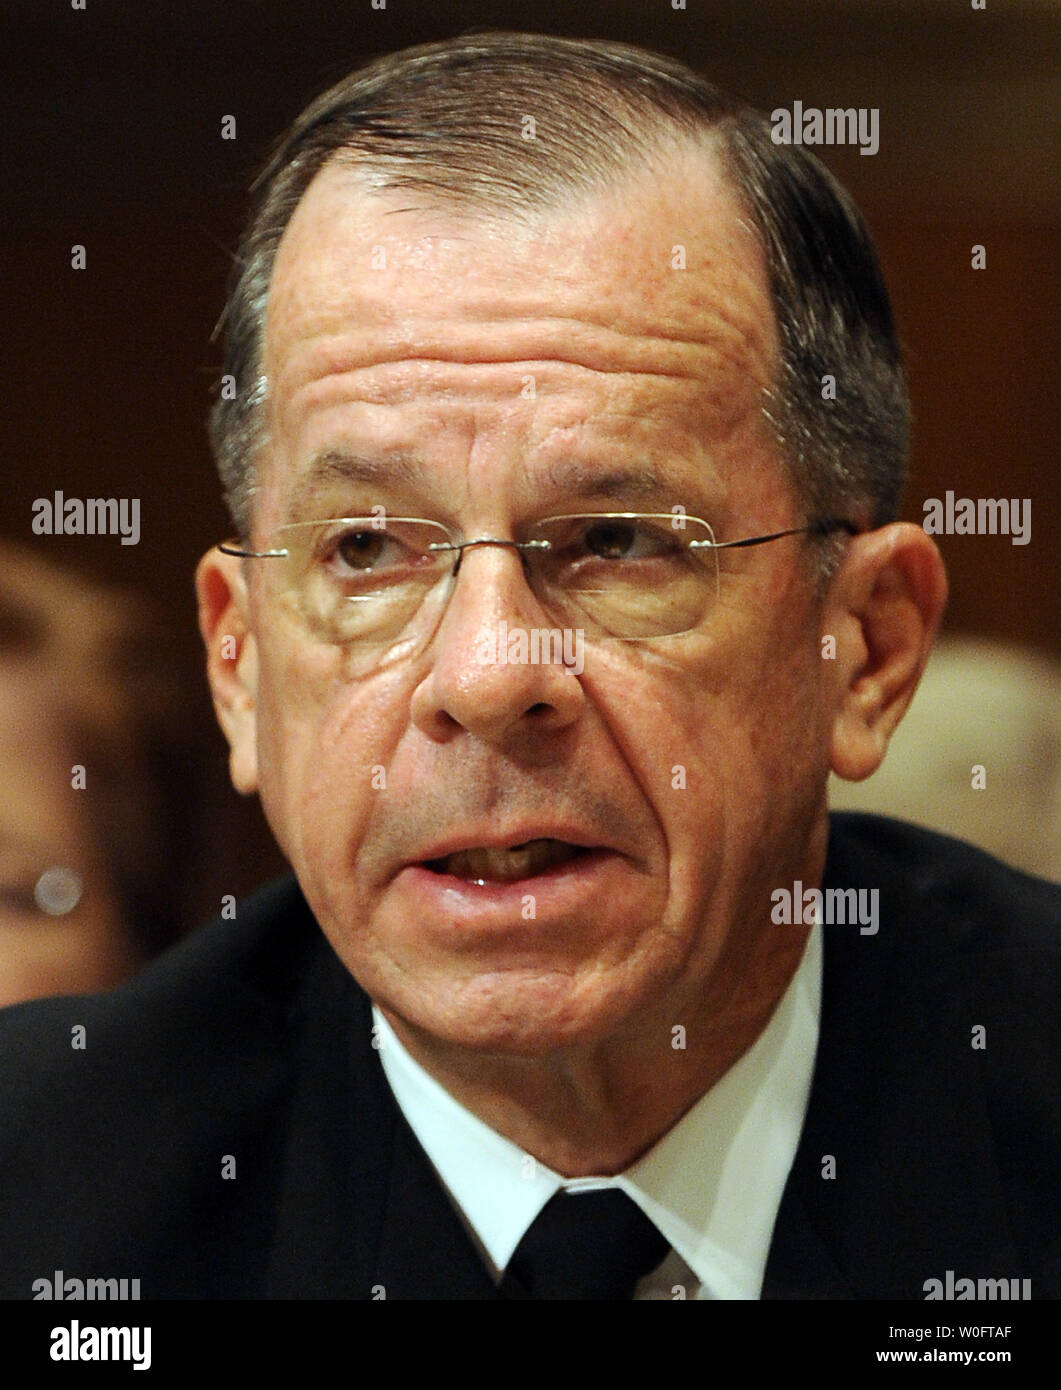 Chairman of the Joint Chiefs of Staff Adm. Michael Mullen testifies before the Senate Armed Services Committee regarding the new Strategic Arms Reduction Treaty (START) with Russia, aimed at reducing strategic nuclear arms, on Capitol Hill in Washington on June 17, 2010.    UPI/Roger L. Wollenberg Stock Photo